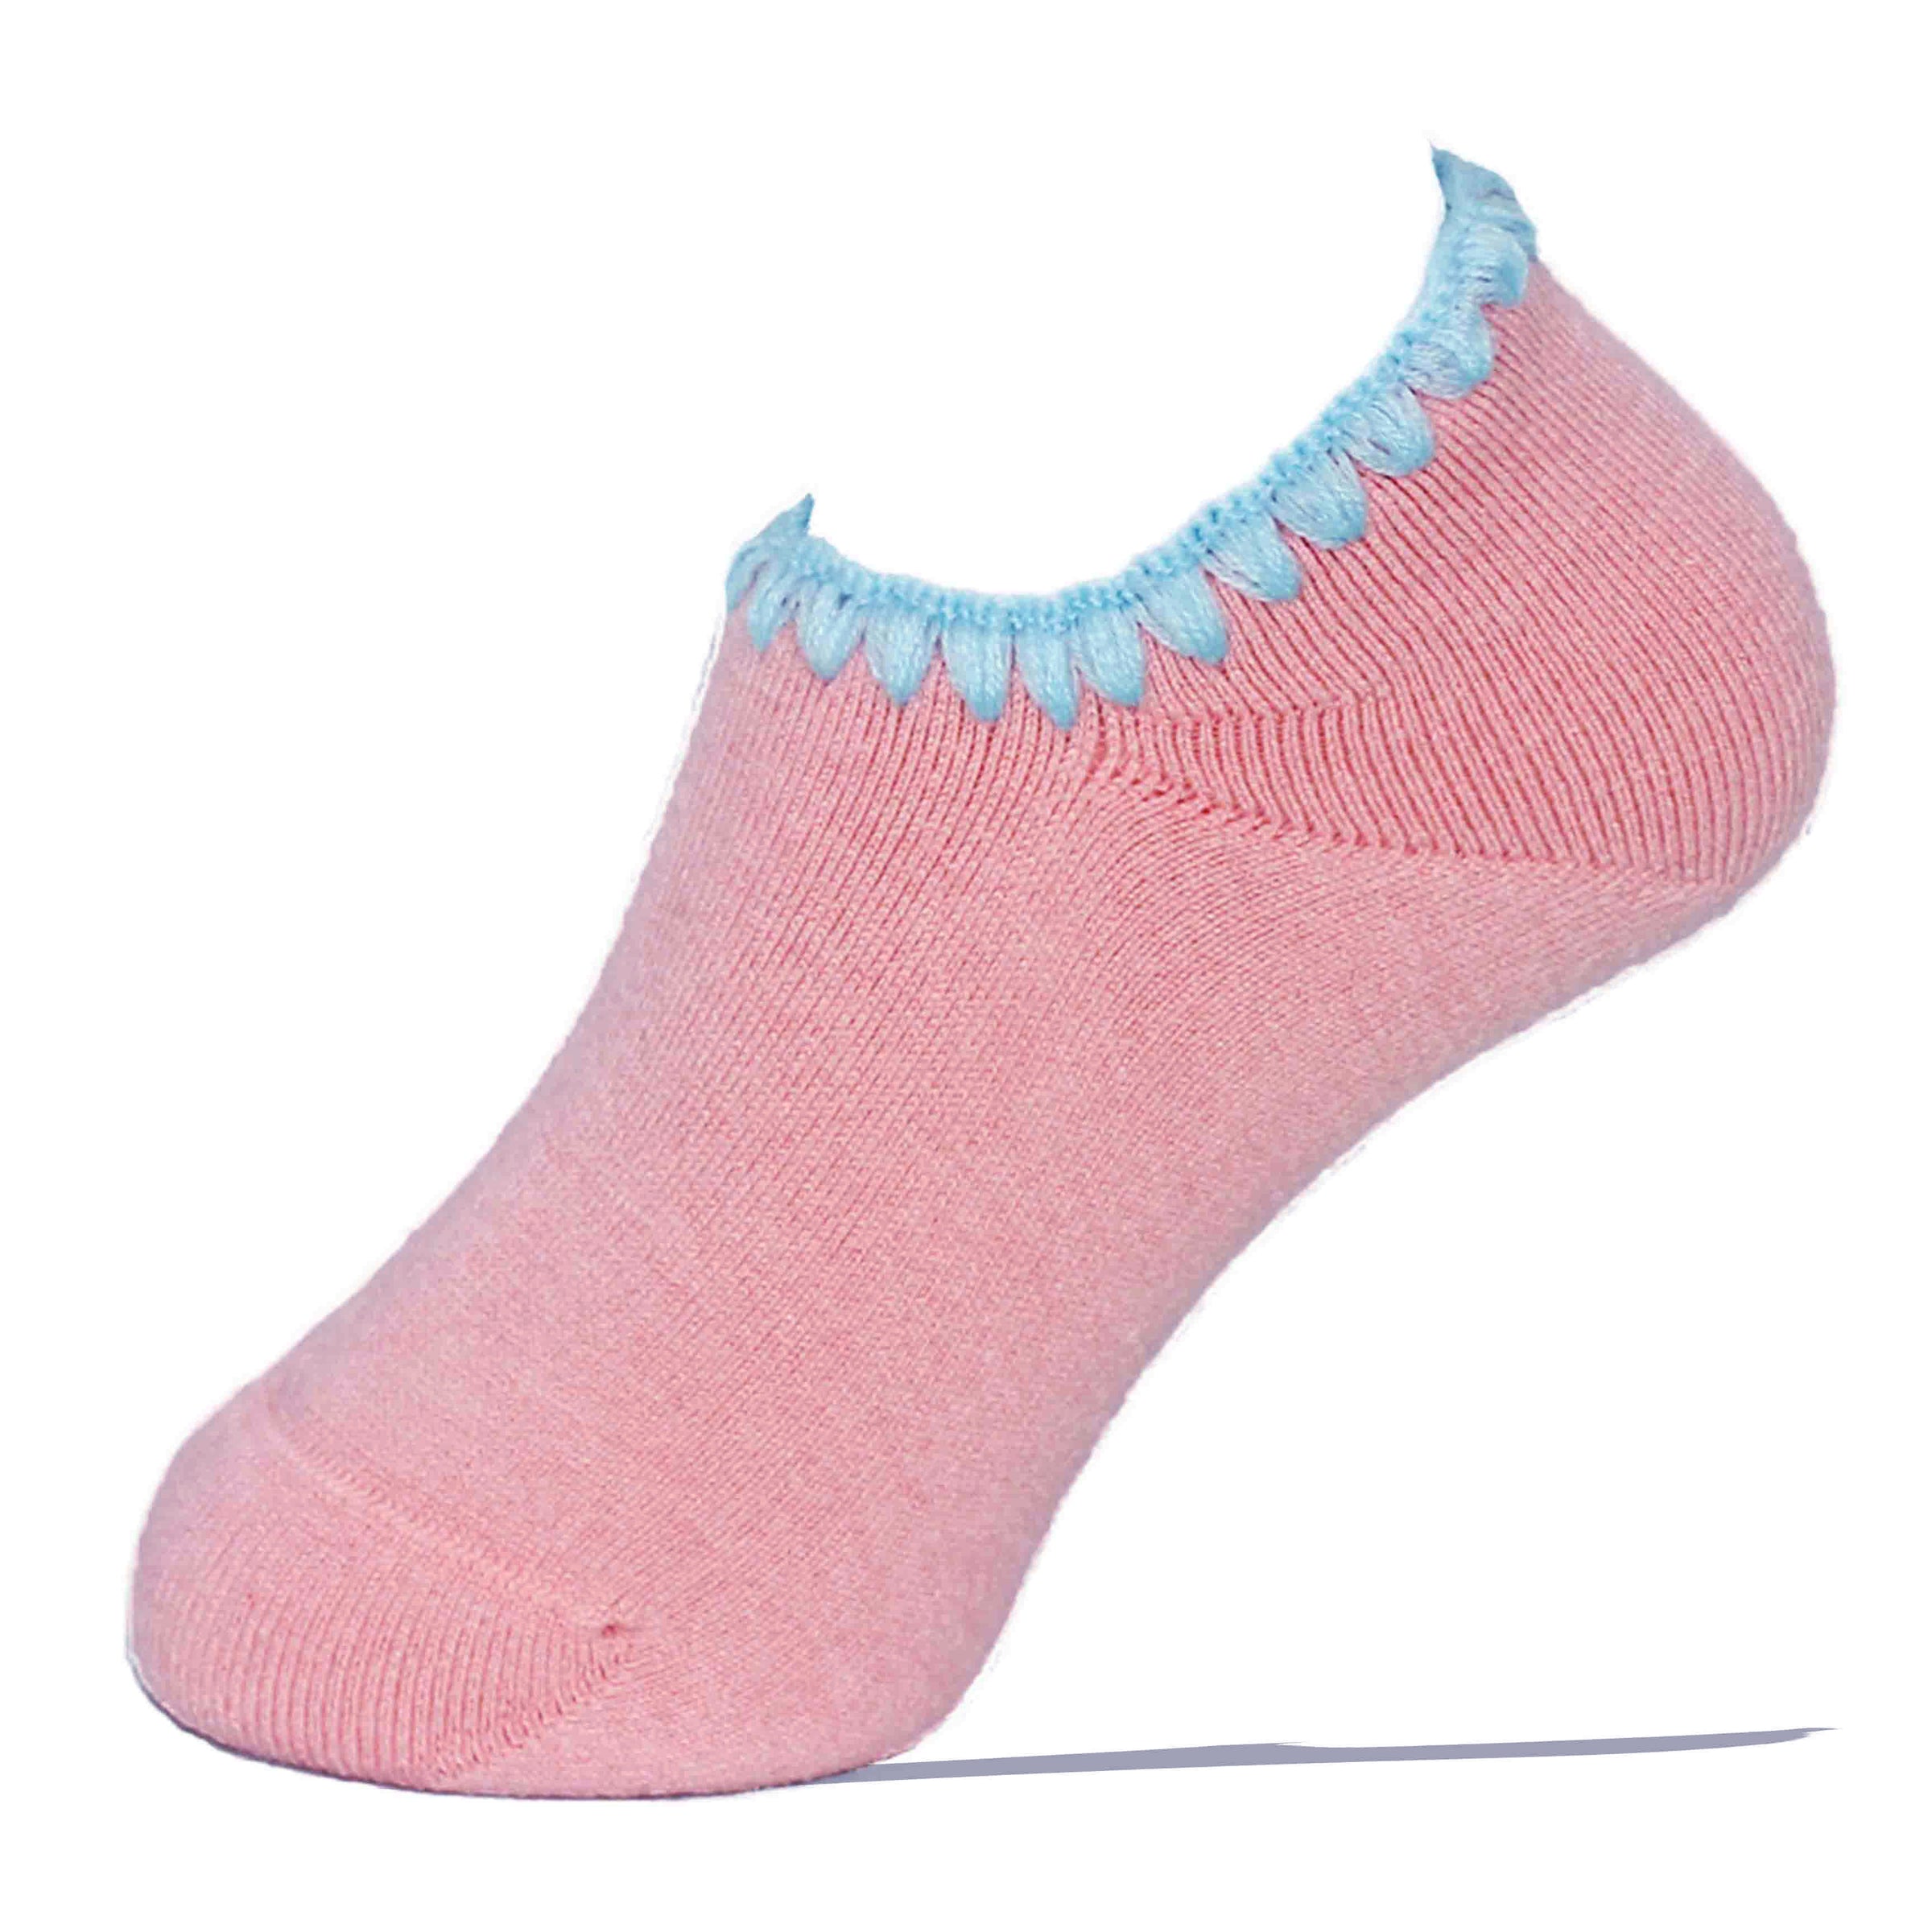 CHERRYSTONE® Slipper Socks | Candy Color with Grips | Peach - CHERRYSTONE by MARKET TO JAPAN LLC